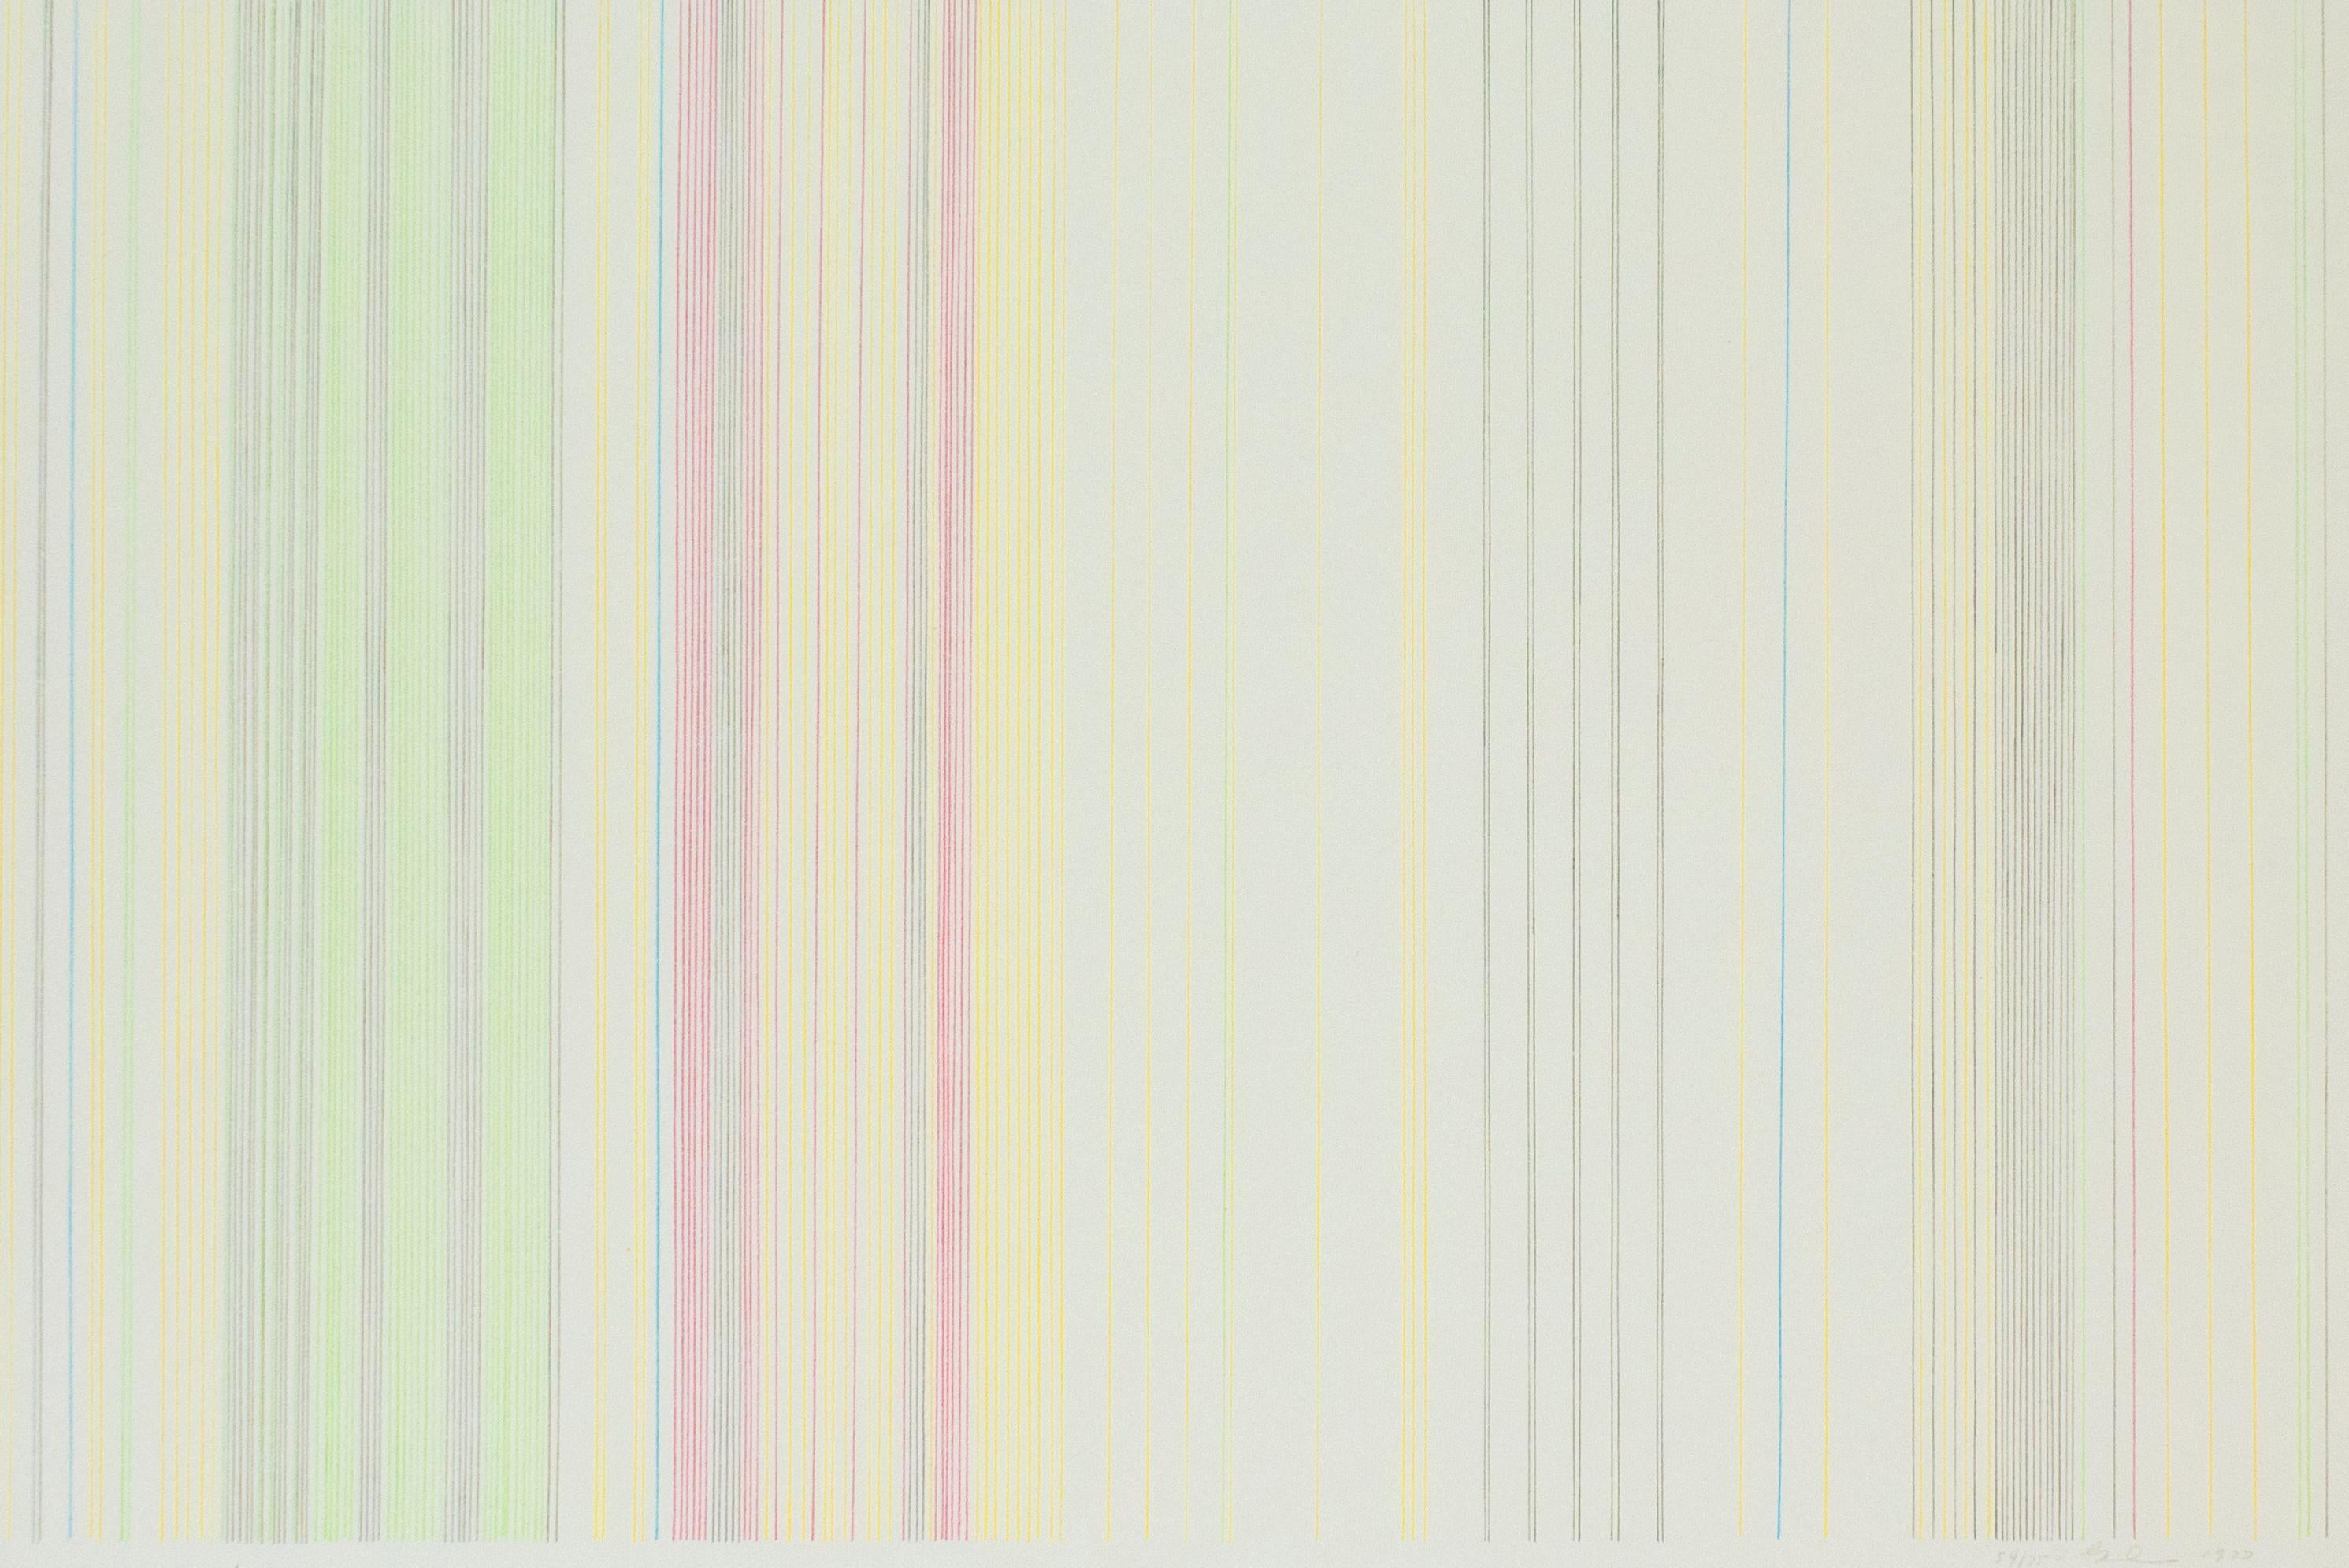 Rainbow shades shine in delicate clusters of vertical lines, in this abstract, geometric lithograph. Vibrant yellow, green, magenta pink, blue and brown take on the organic quality of handmade paper, resulting in this subtle iteration of Gene Davis’